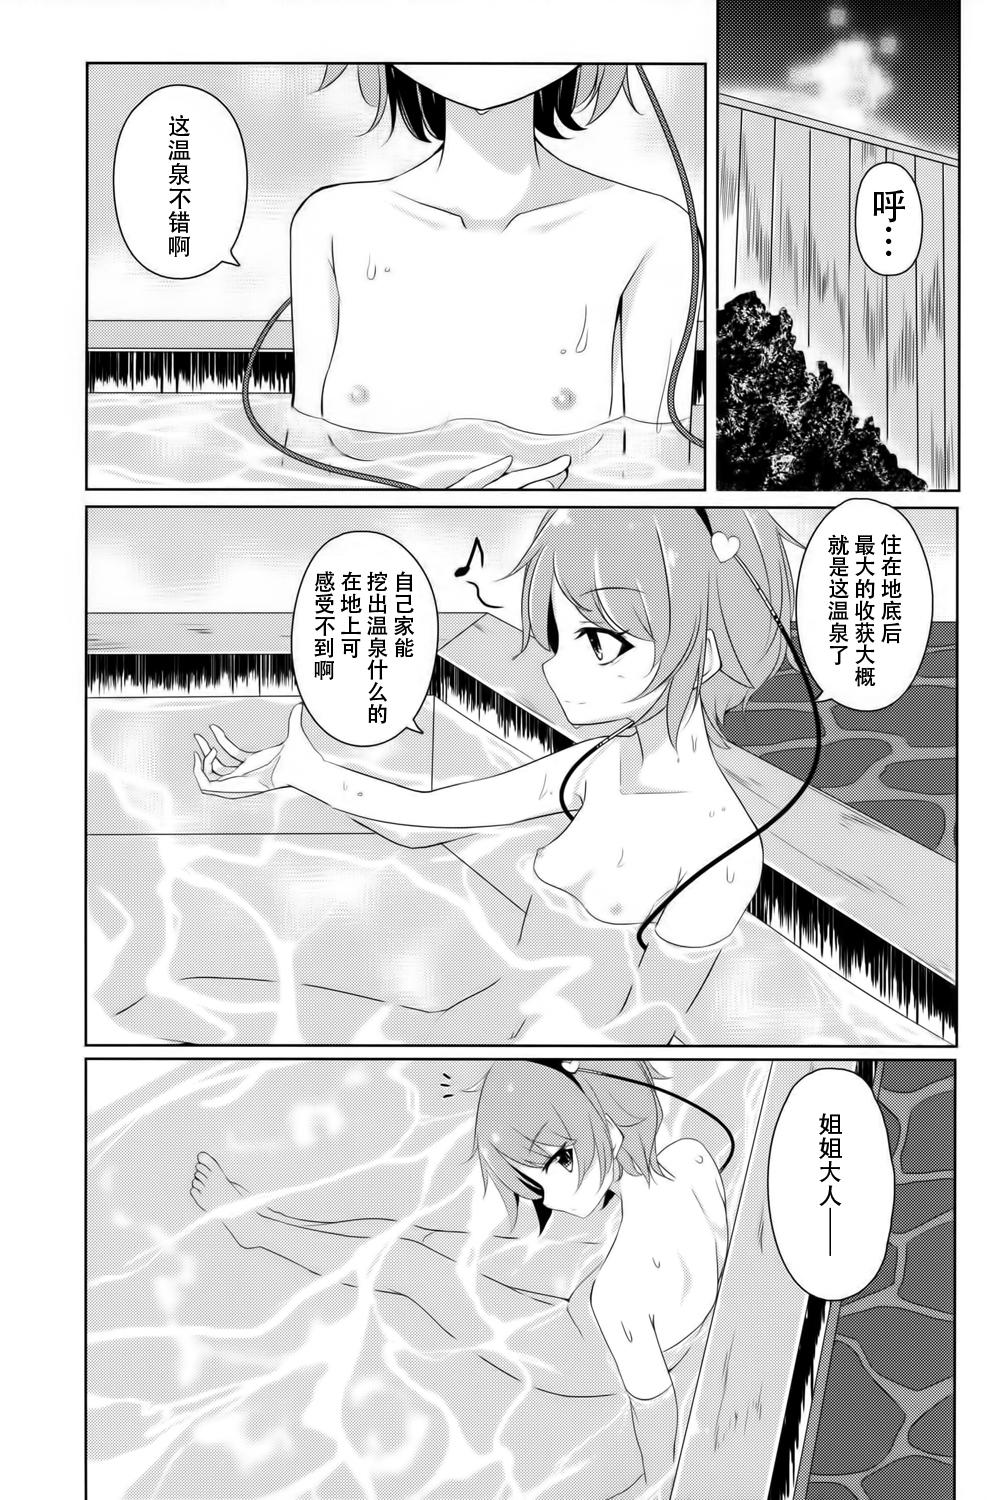 Swallow Onee-chan Kawaii! - Touhou project Sex Toy - Page 3